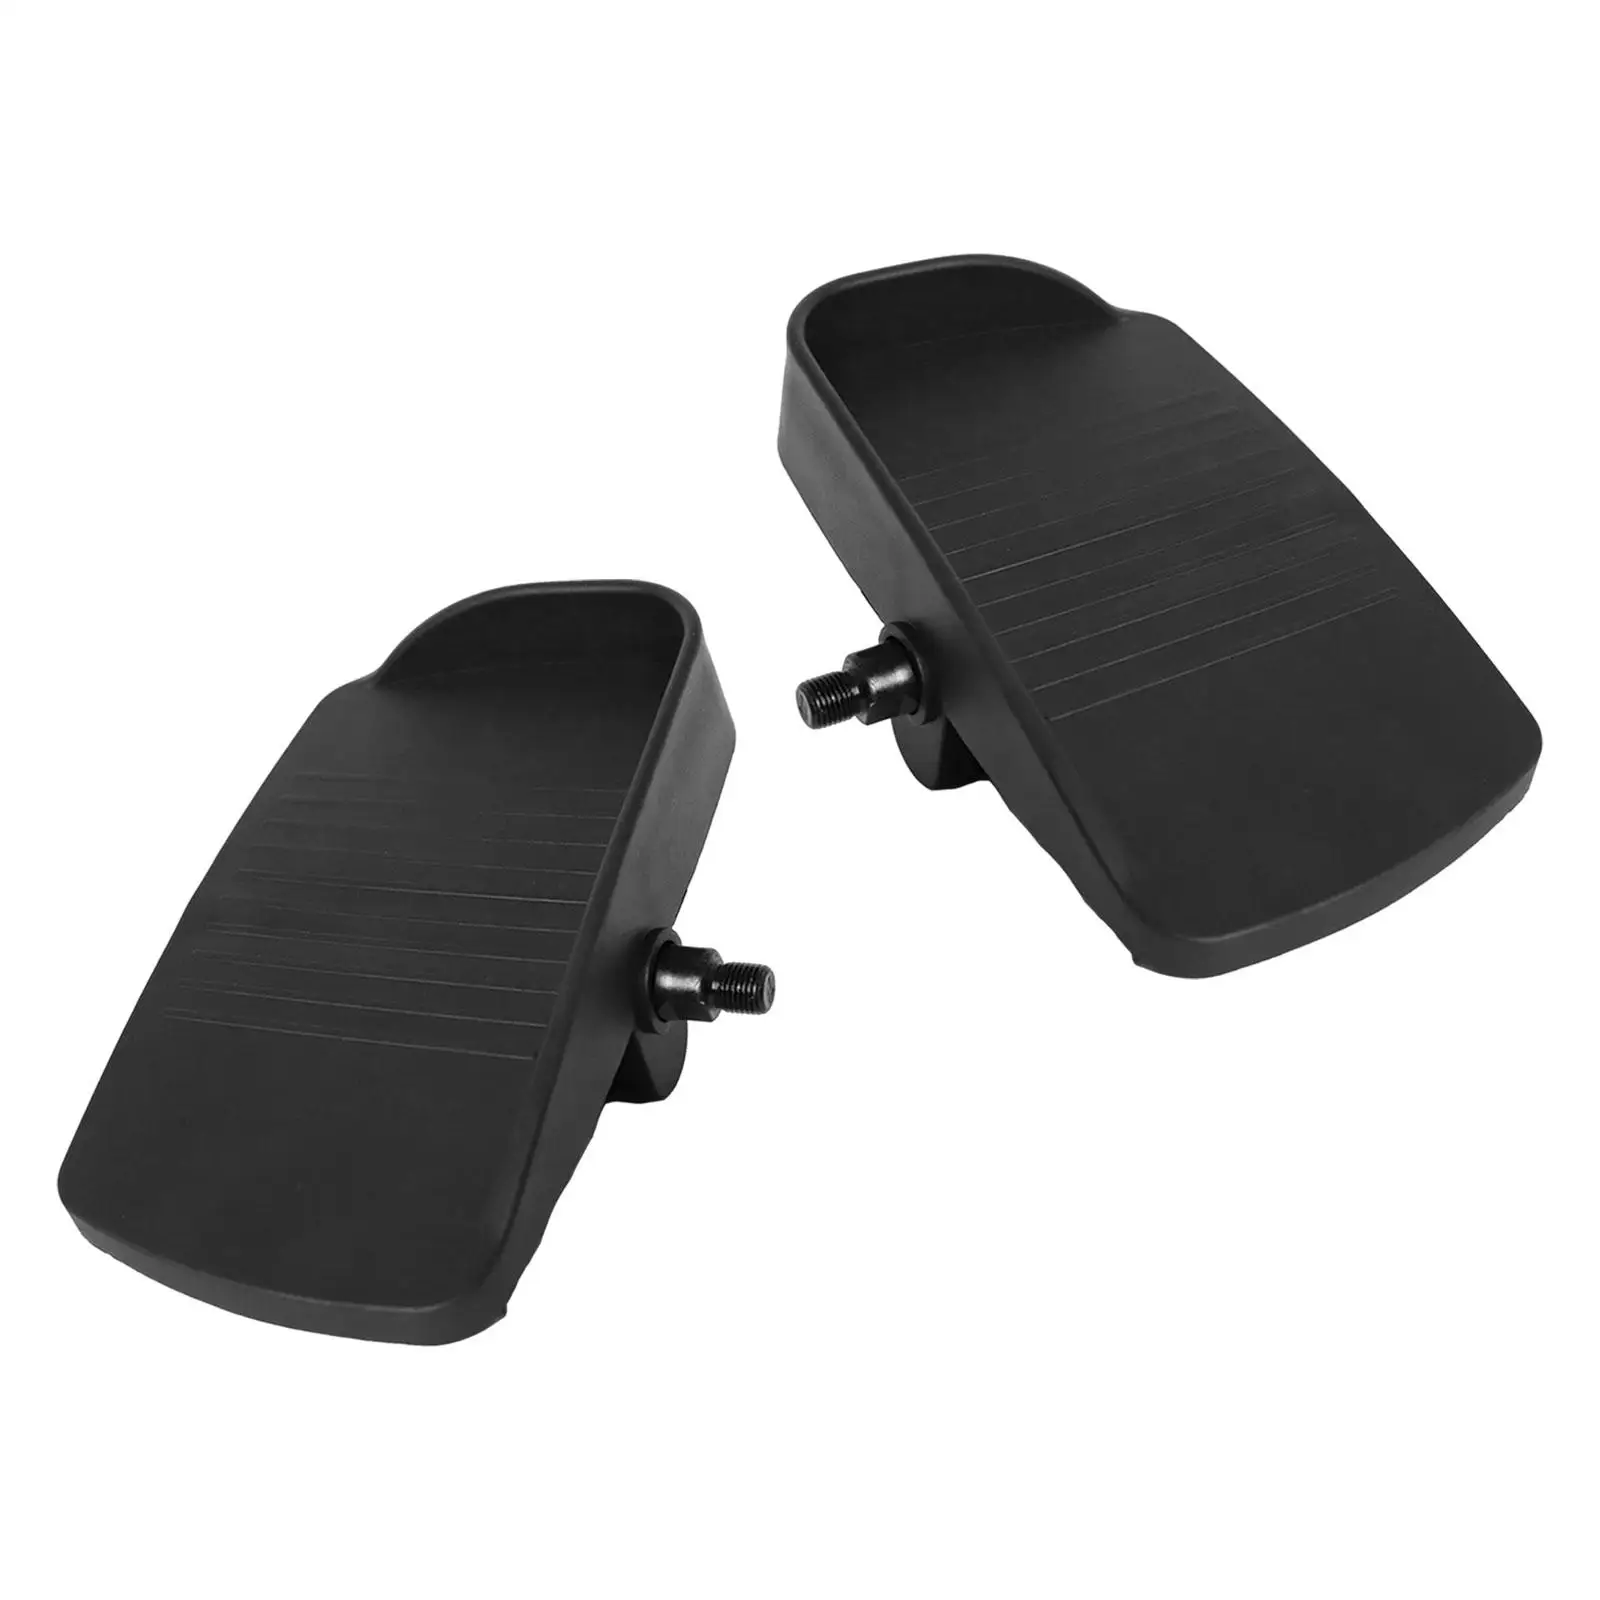 2 Pieces Elliptical Machine Foot Pedals Footboard Leg Training Pedals Replacement Exercise Bike Pedals for Stepper Exercise